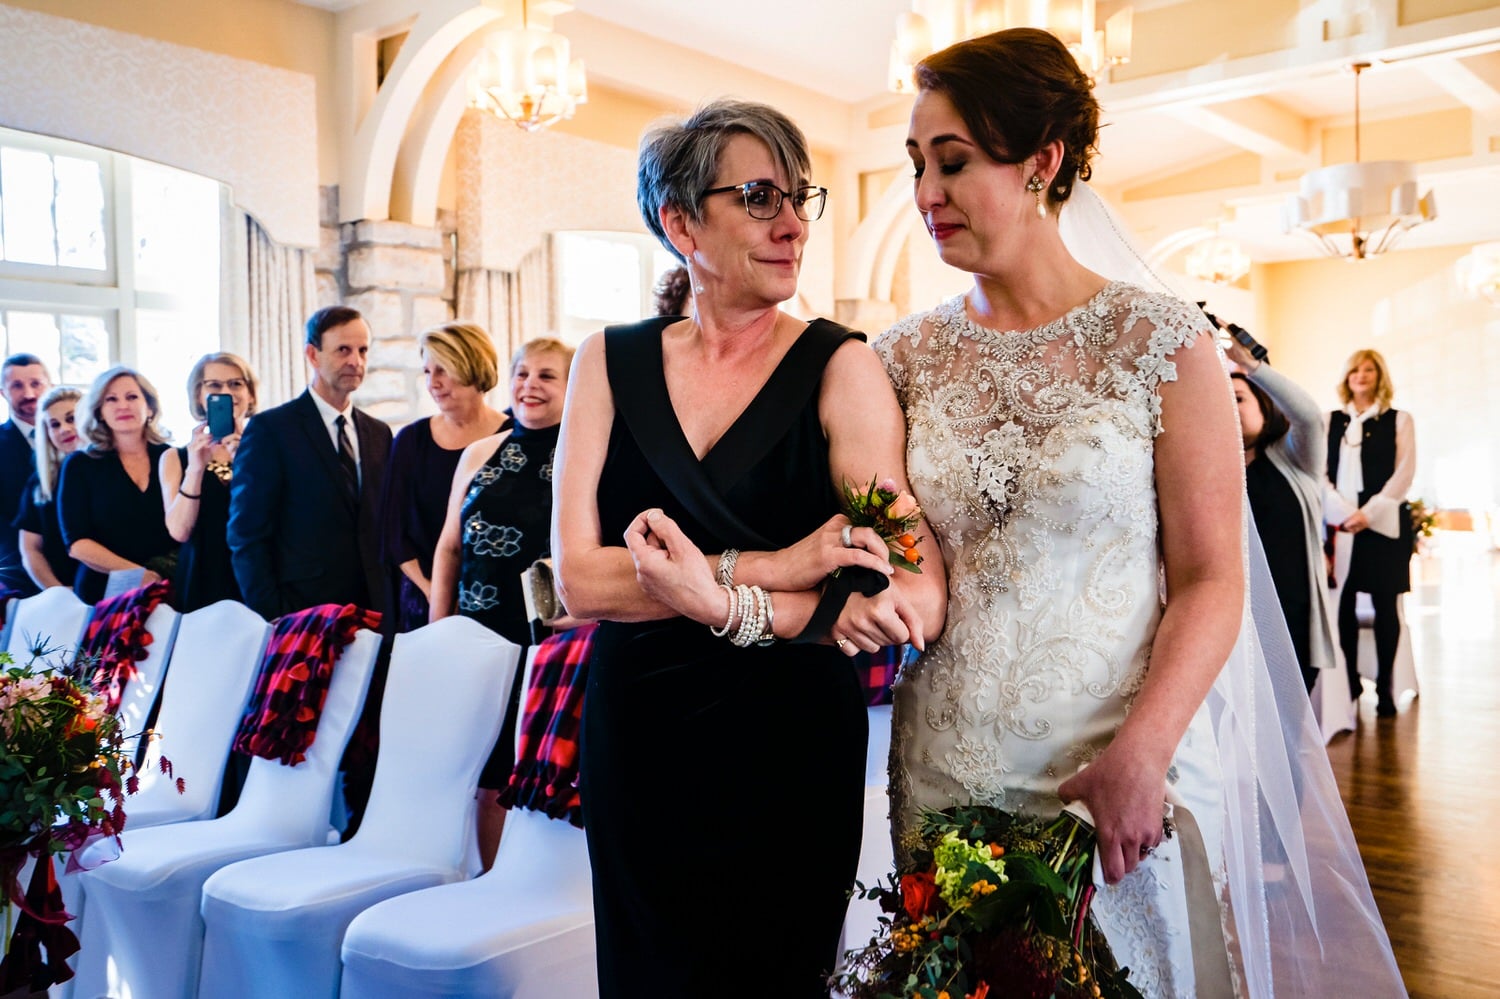 A colorful, candid picture of a bride's mom trying to comfort the bride as happy tears roll down both of their faces as they walk down the aisle for a winter wedding ceremony at The Elms. 